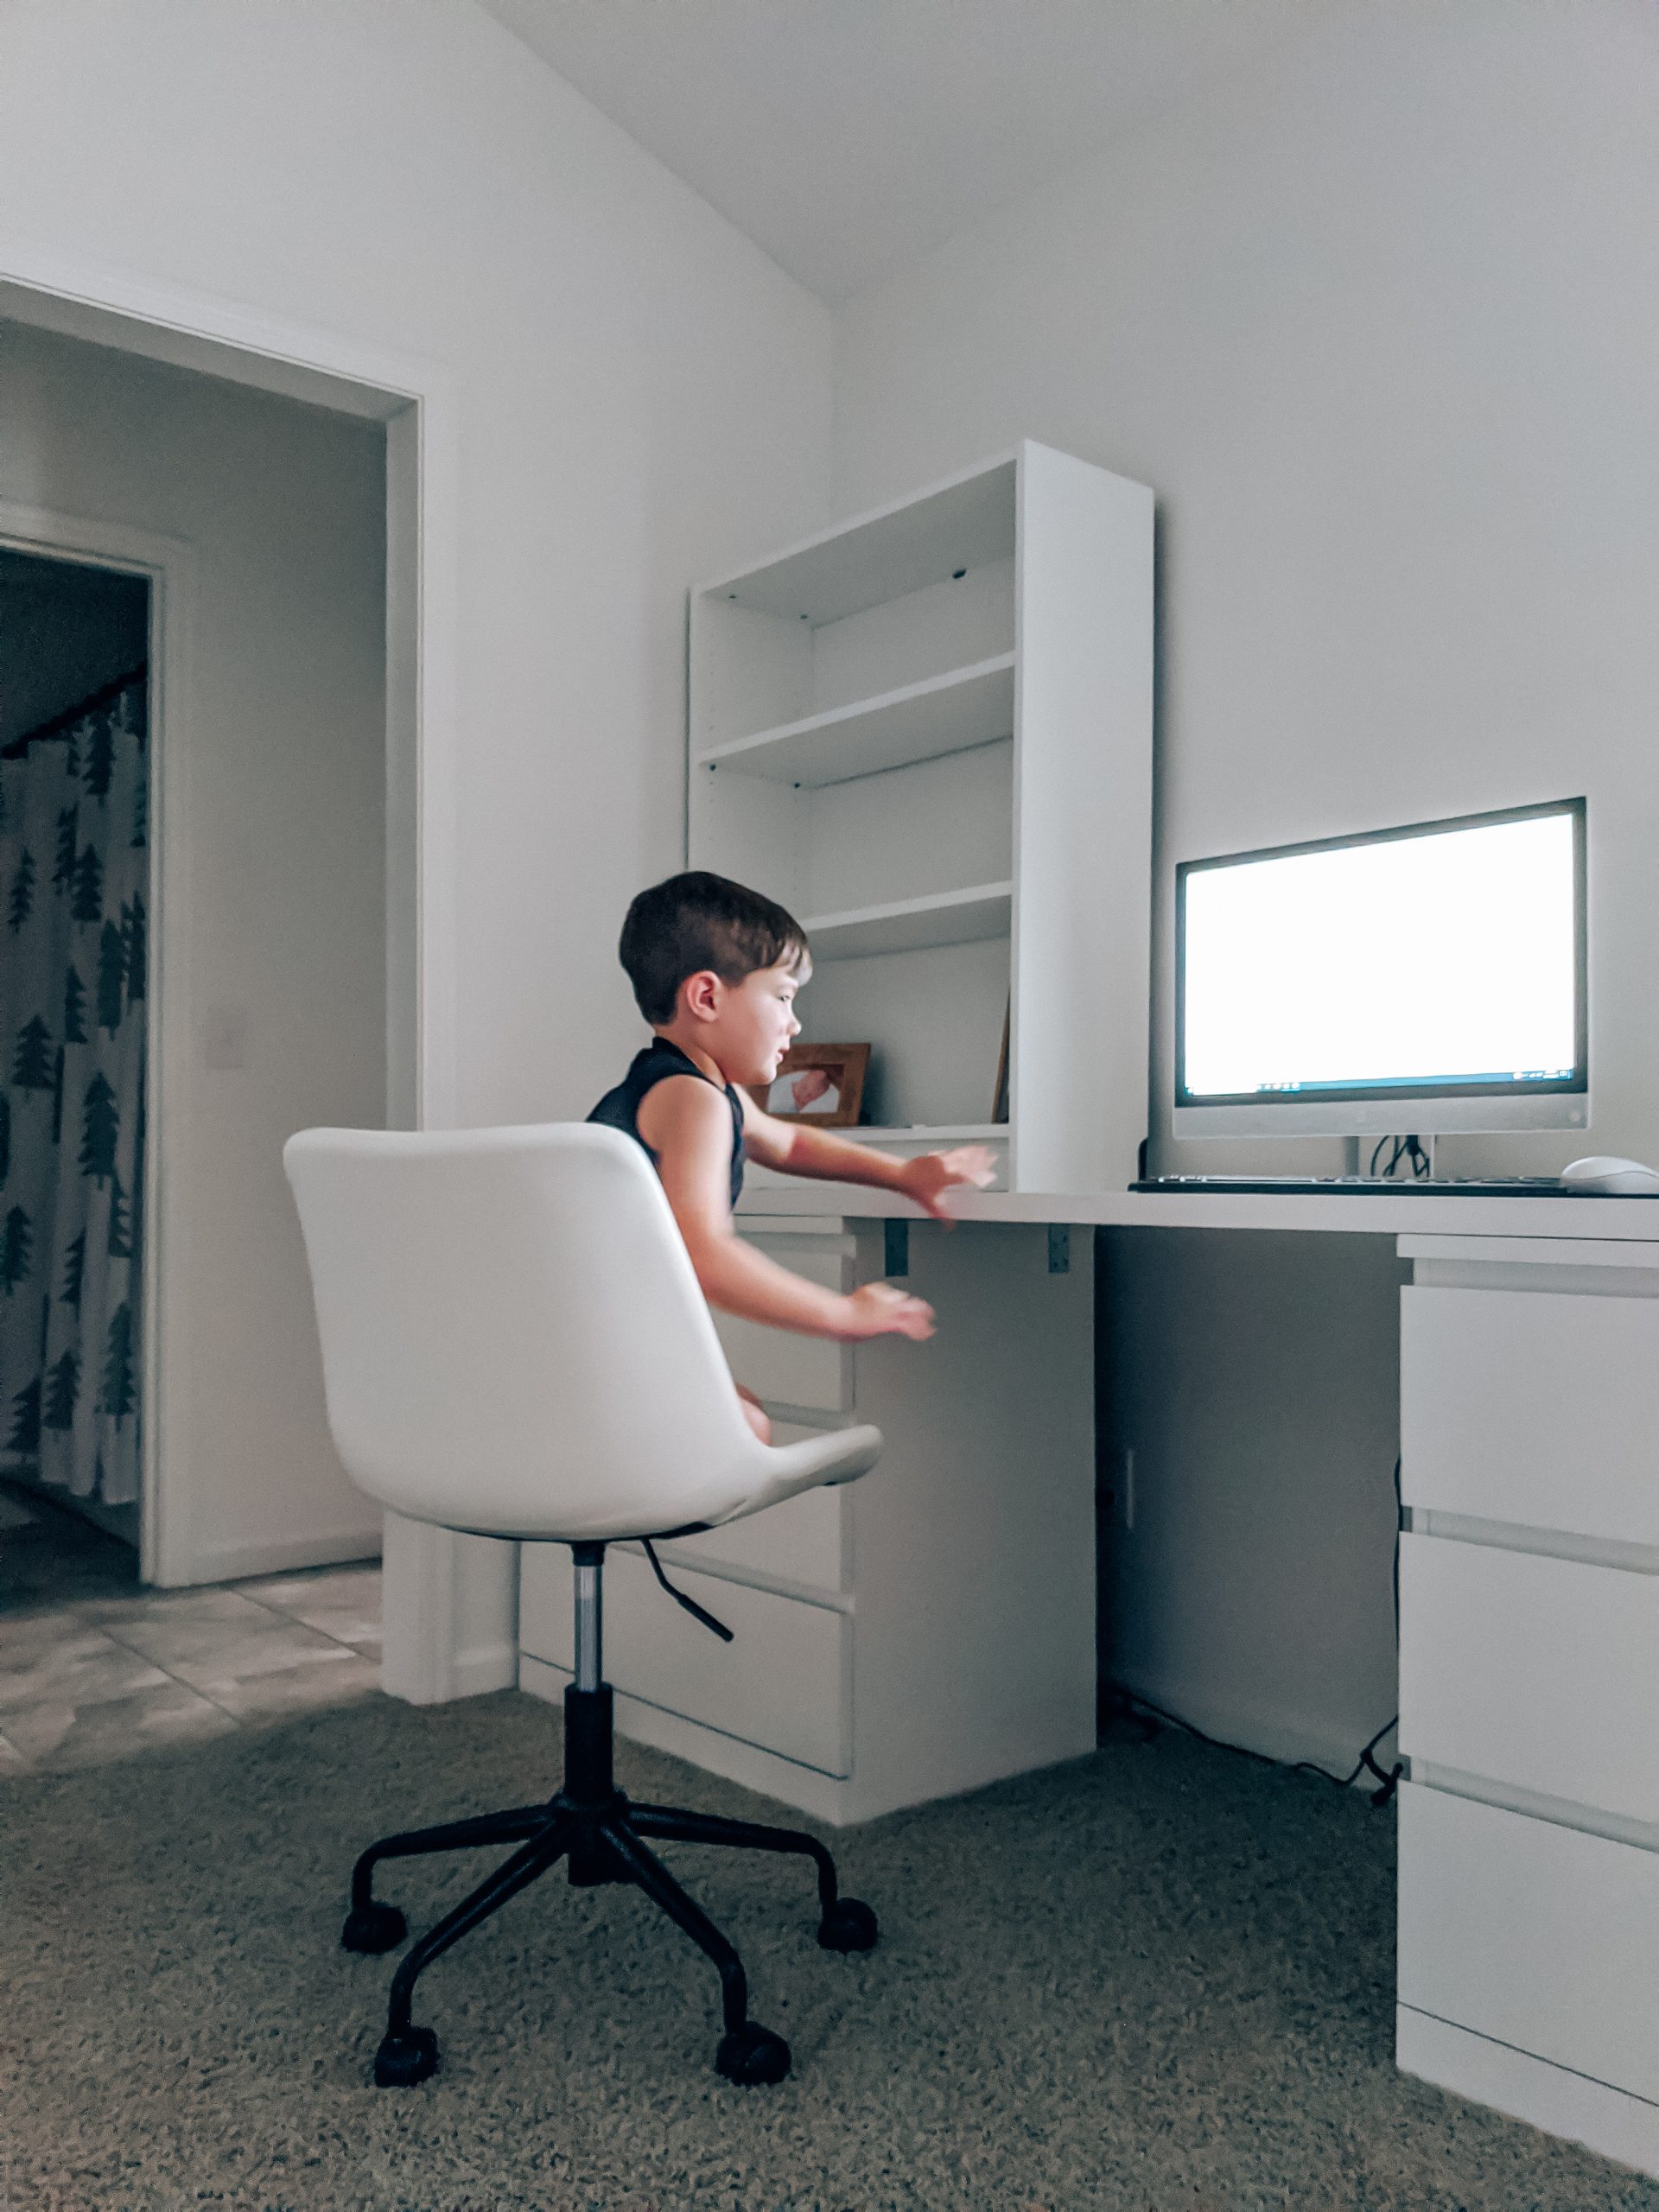 Best Kids Desk Chair - Byron Task Chair Reviews - This kids desk chair is perfect for your virtual learning setup! If you're looking for the best kids desk chair, read this detailed Byron Task Chair review! (sponsored by #Wayfair - #virtuallearning #homeschool #homeoffice )